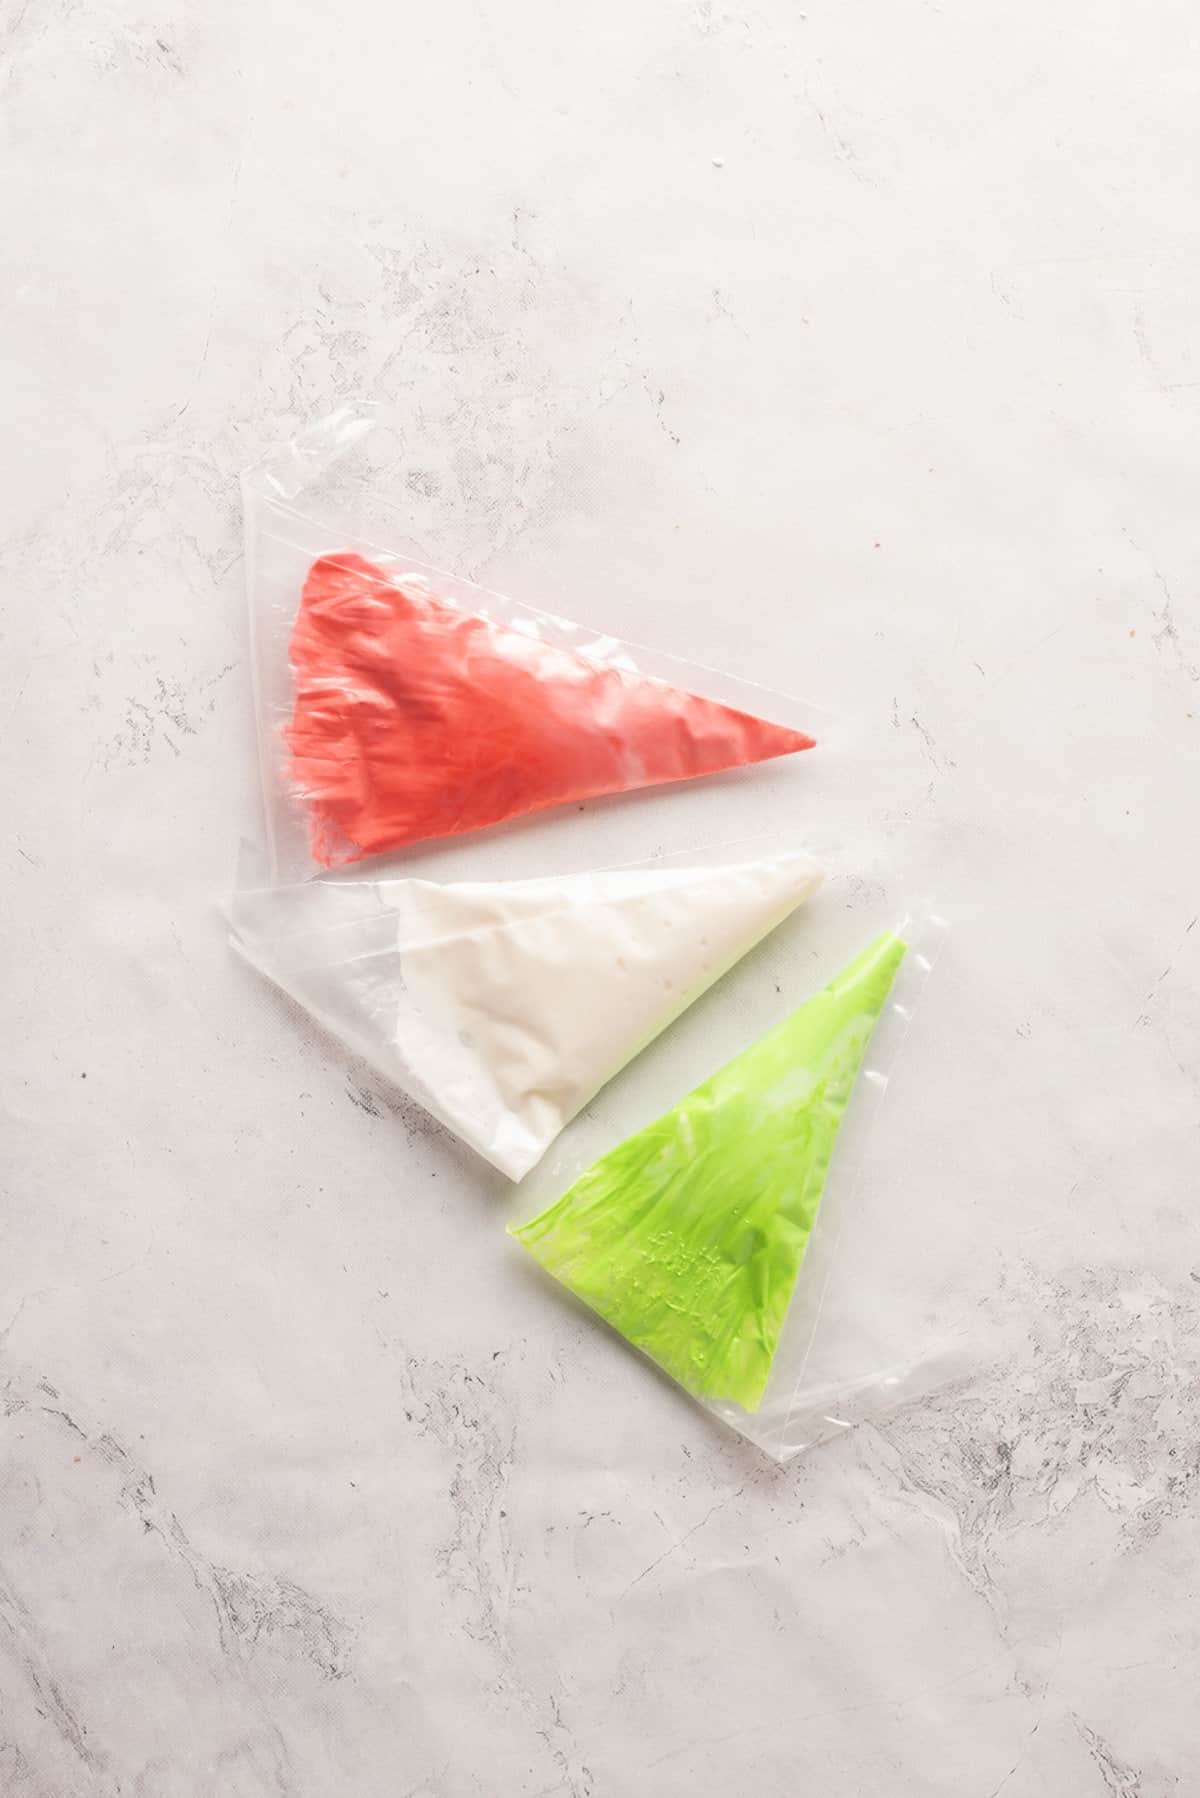 Overhead view showing three bags of icing mixture in red, white and green colors.